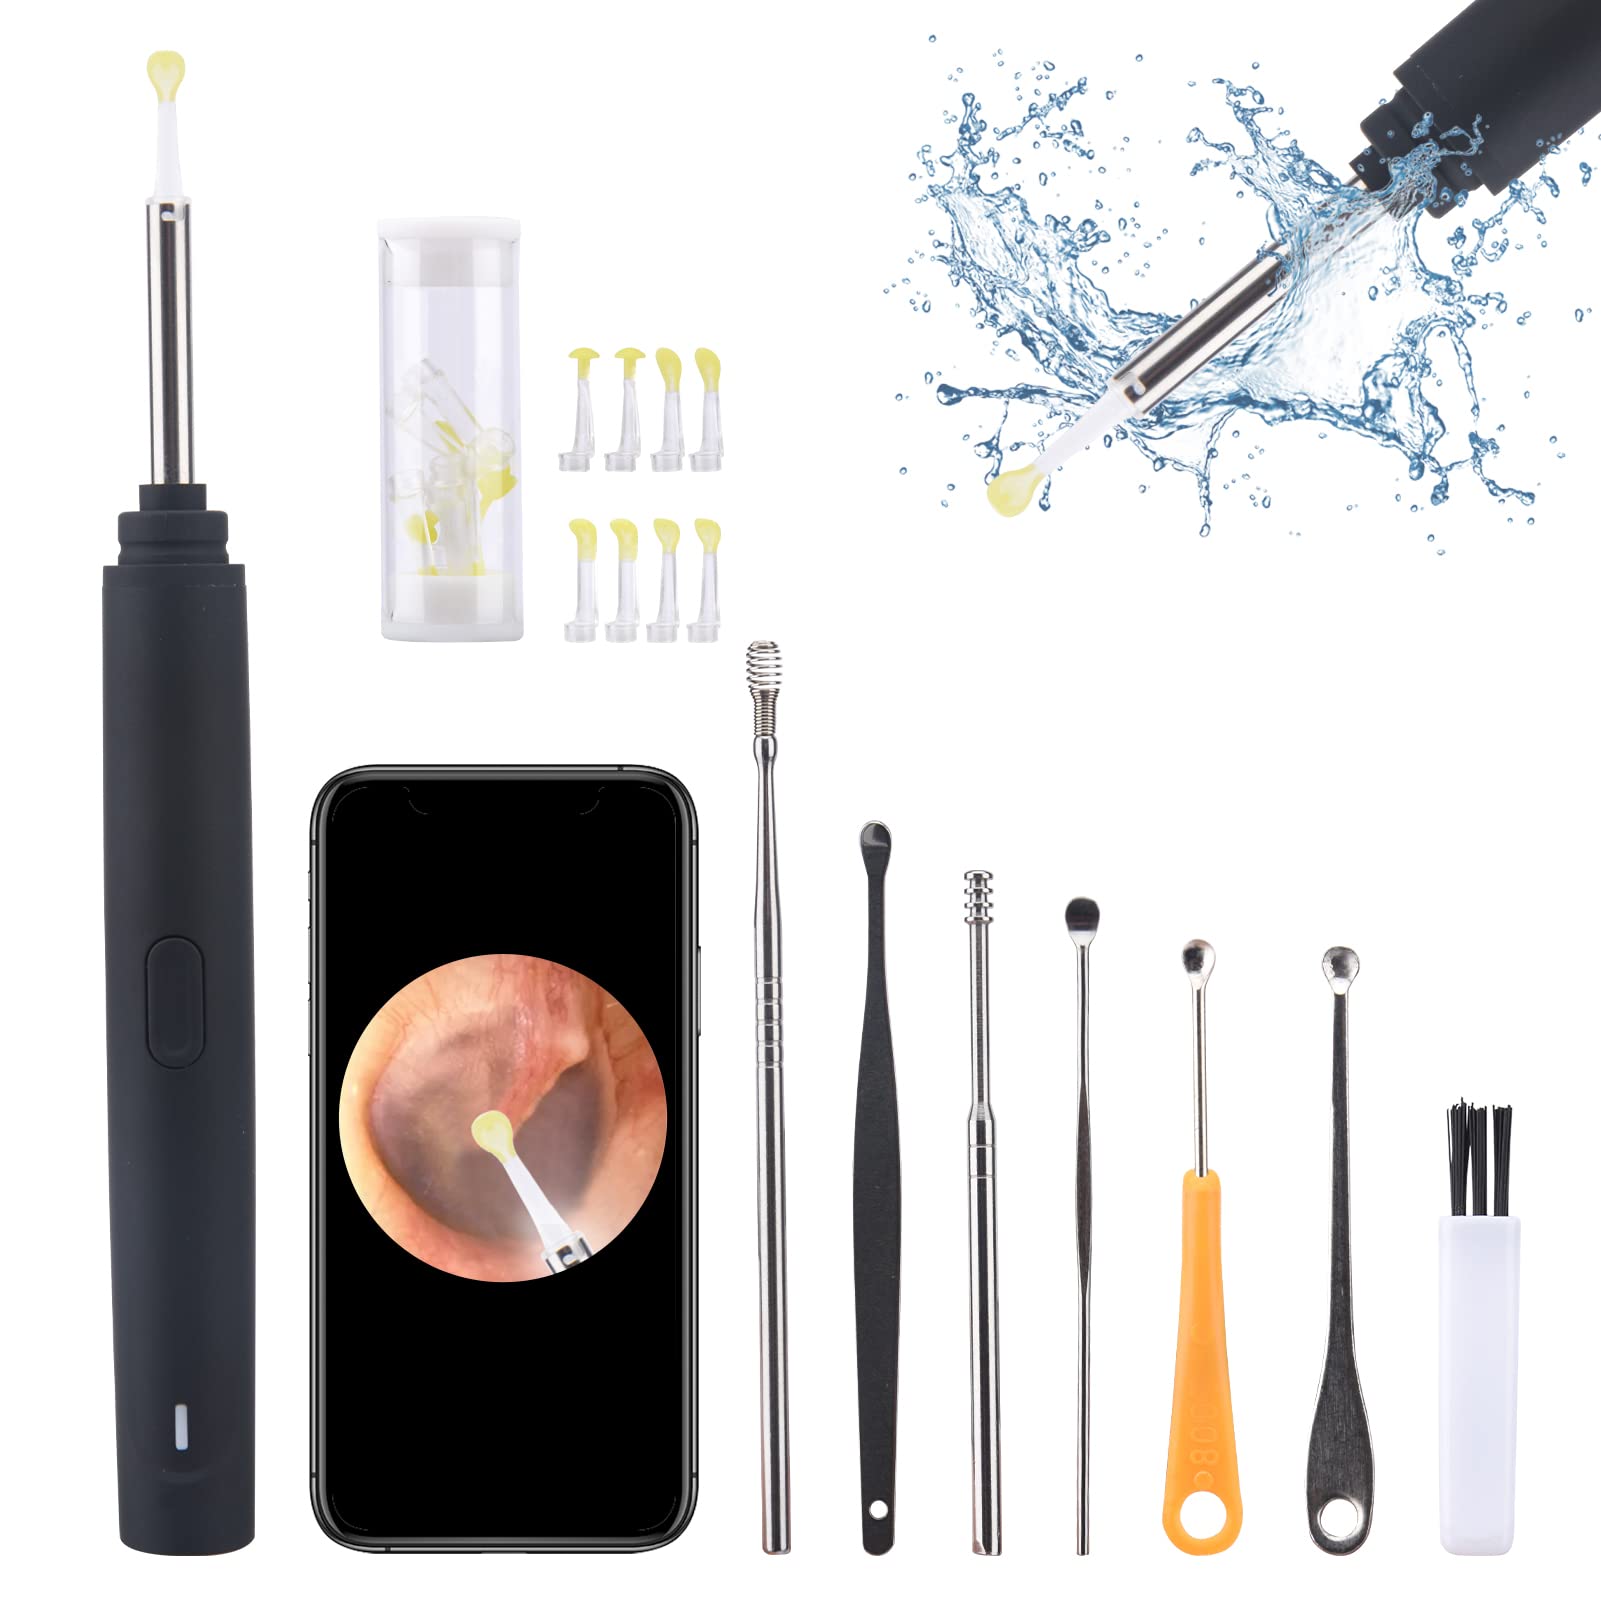 Ear Wax Removal Tool Camera Smart Visual Ear Cleaner 1296P FHD